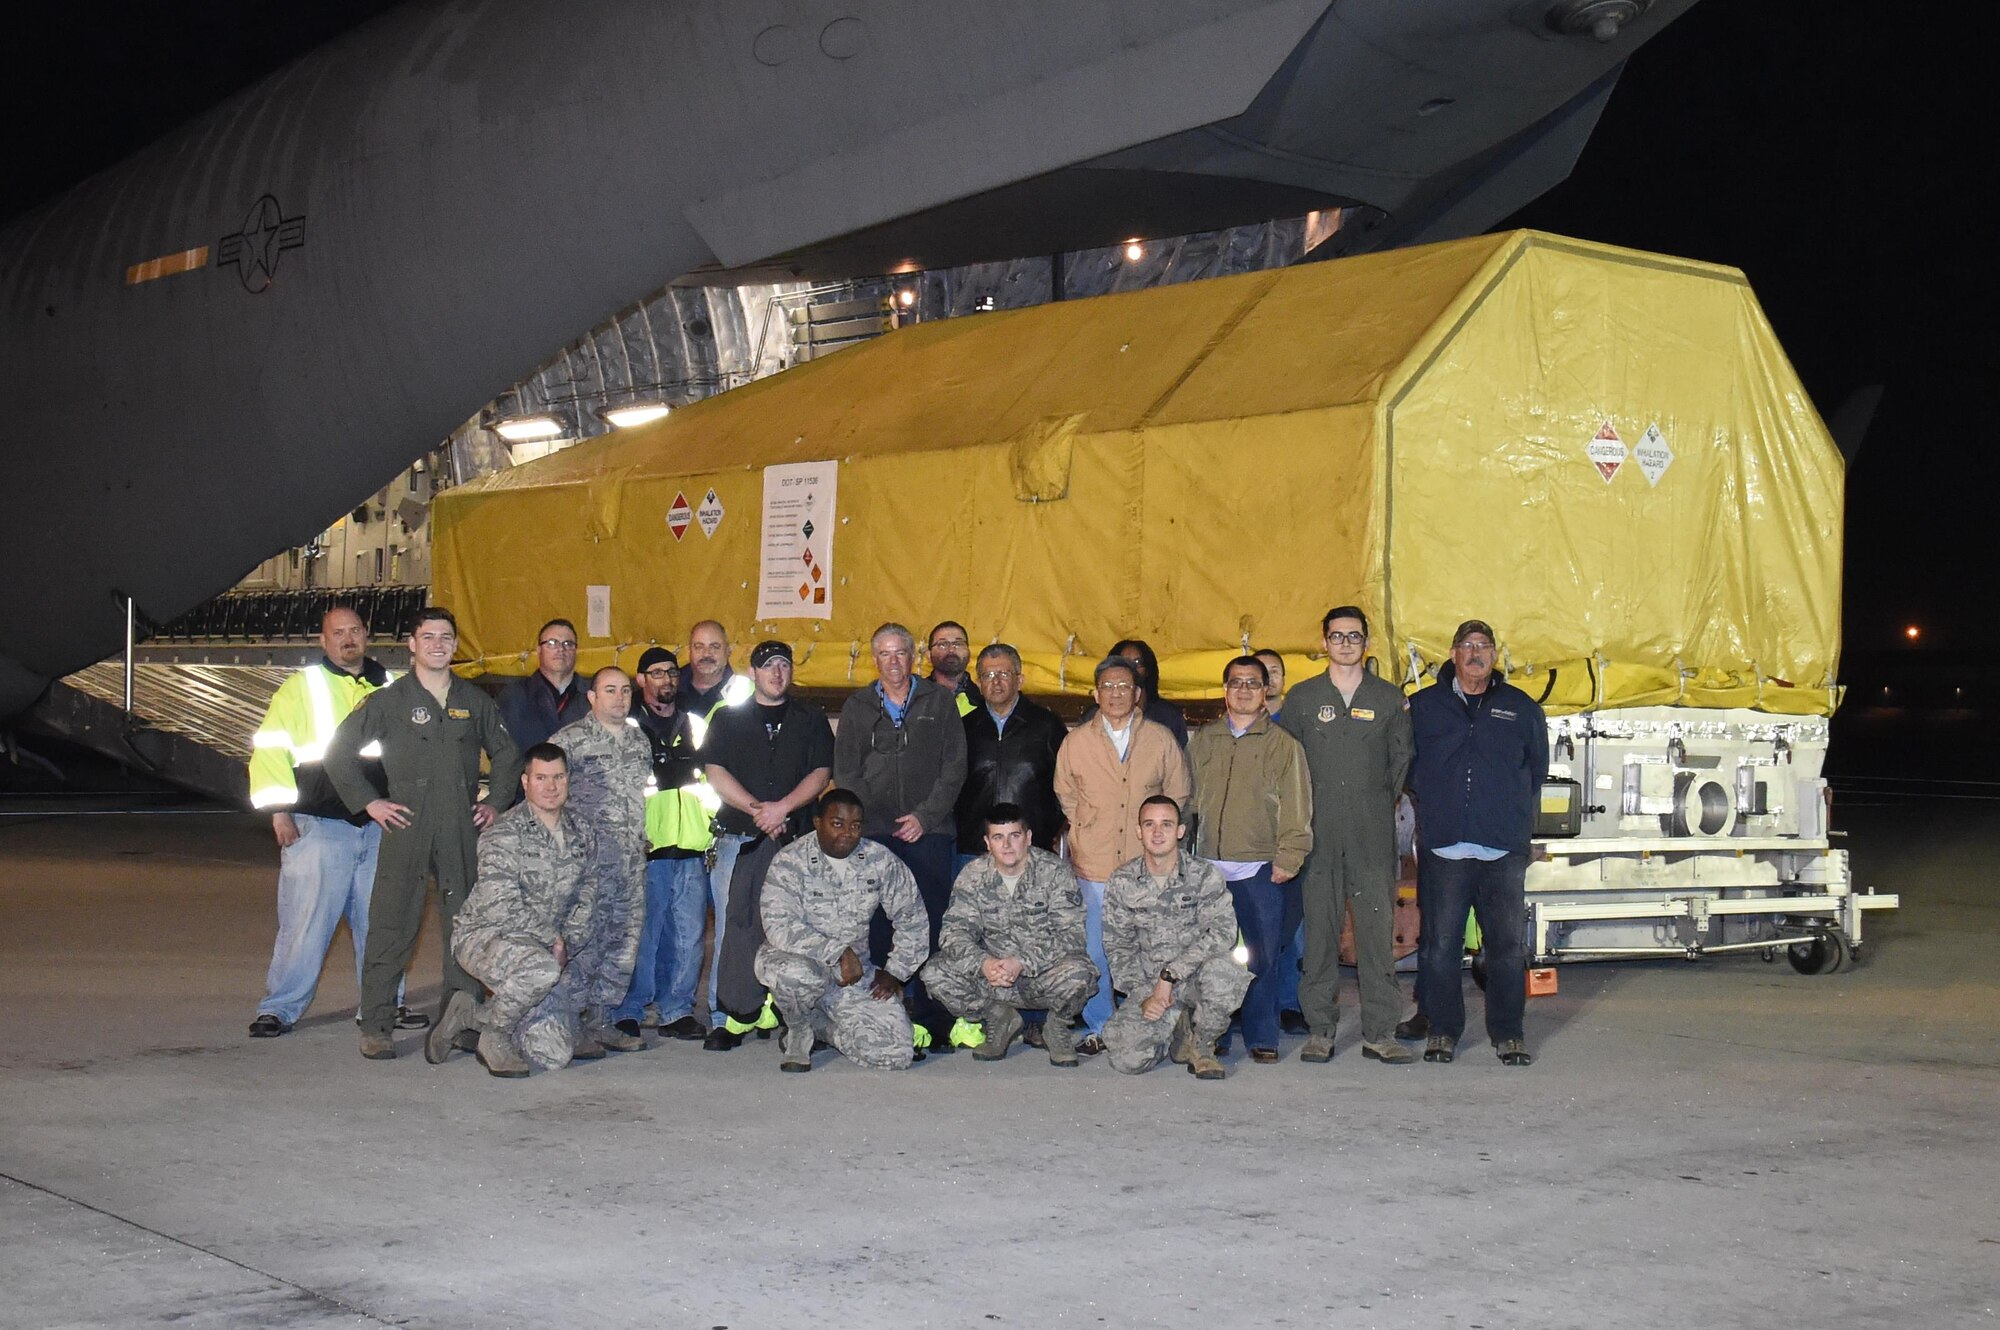 The ninth Wideband Global SATCOM (WGS-9), satellite is transported from the Boeing facility in El Segundo to LAX for delivery via an Air Force C-17 Globe Master, to Cape Canaveral Air Force Station, Florida, Jan, 9.  WGS-9 will provide additional communications capabilities to both U.S. forces and international partners after undergoing final processing, encapsulation, and transport to the launch pad.  (U. S. Air Force photo/ Joseph M. Juarez Sr.)